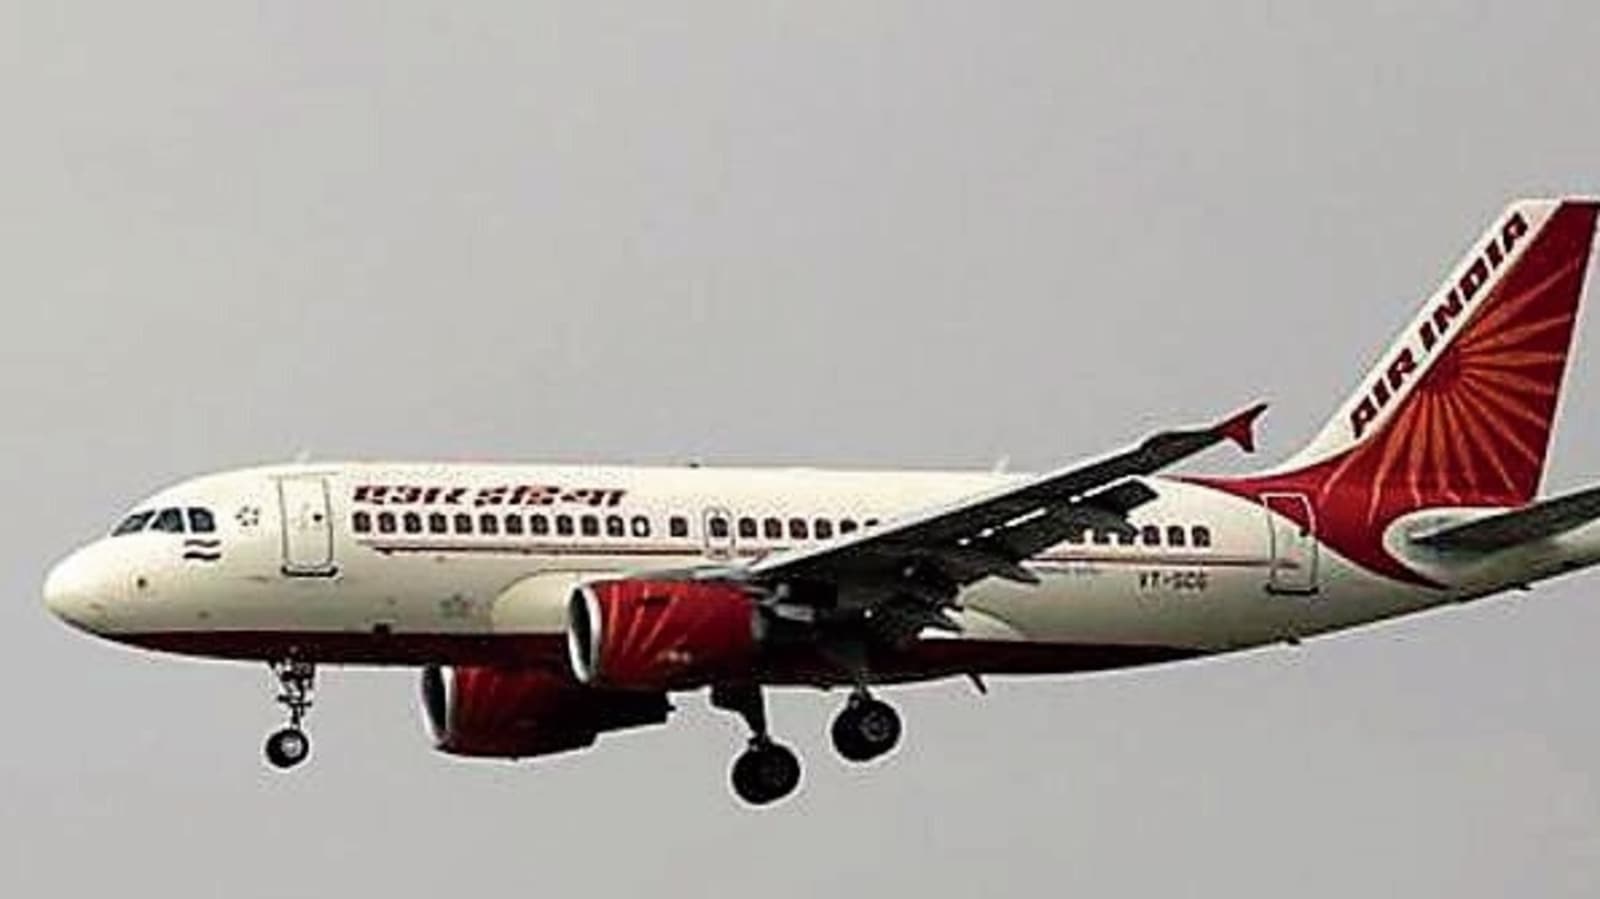 Drunk man pees on female passenger in Air India US-India flight: Report |  Latest News India - Hindustan Times